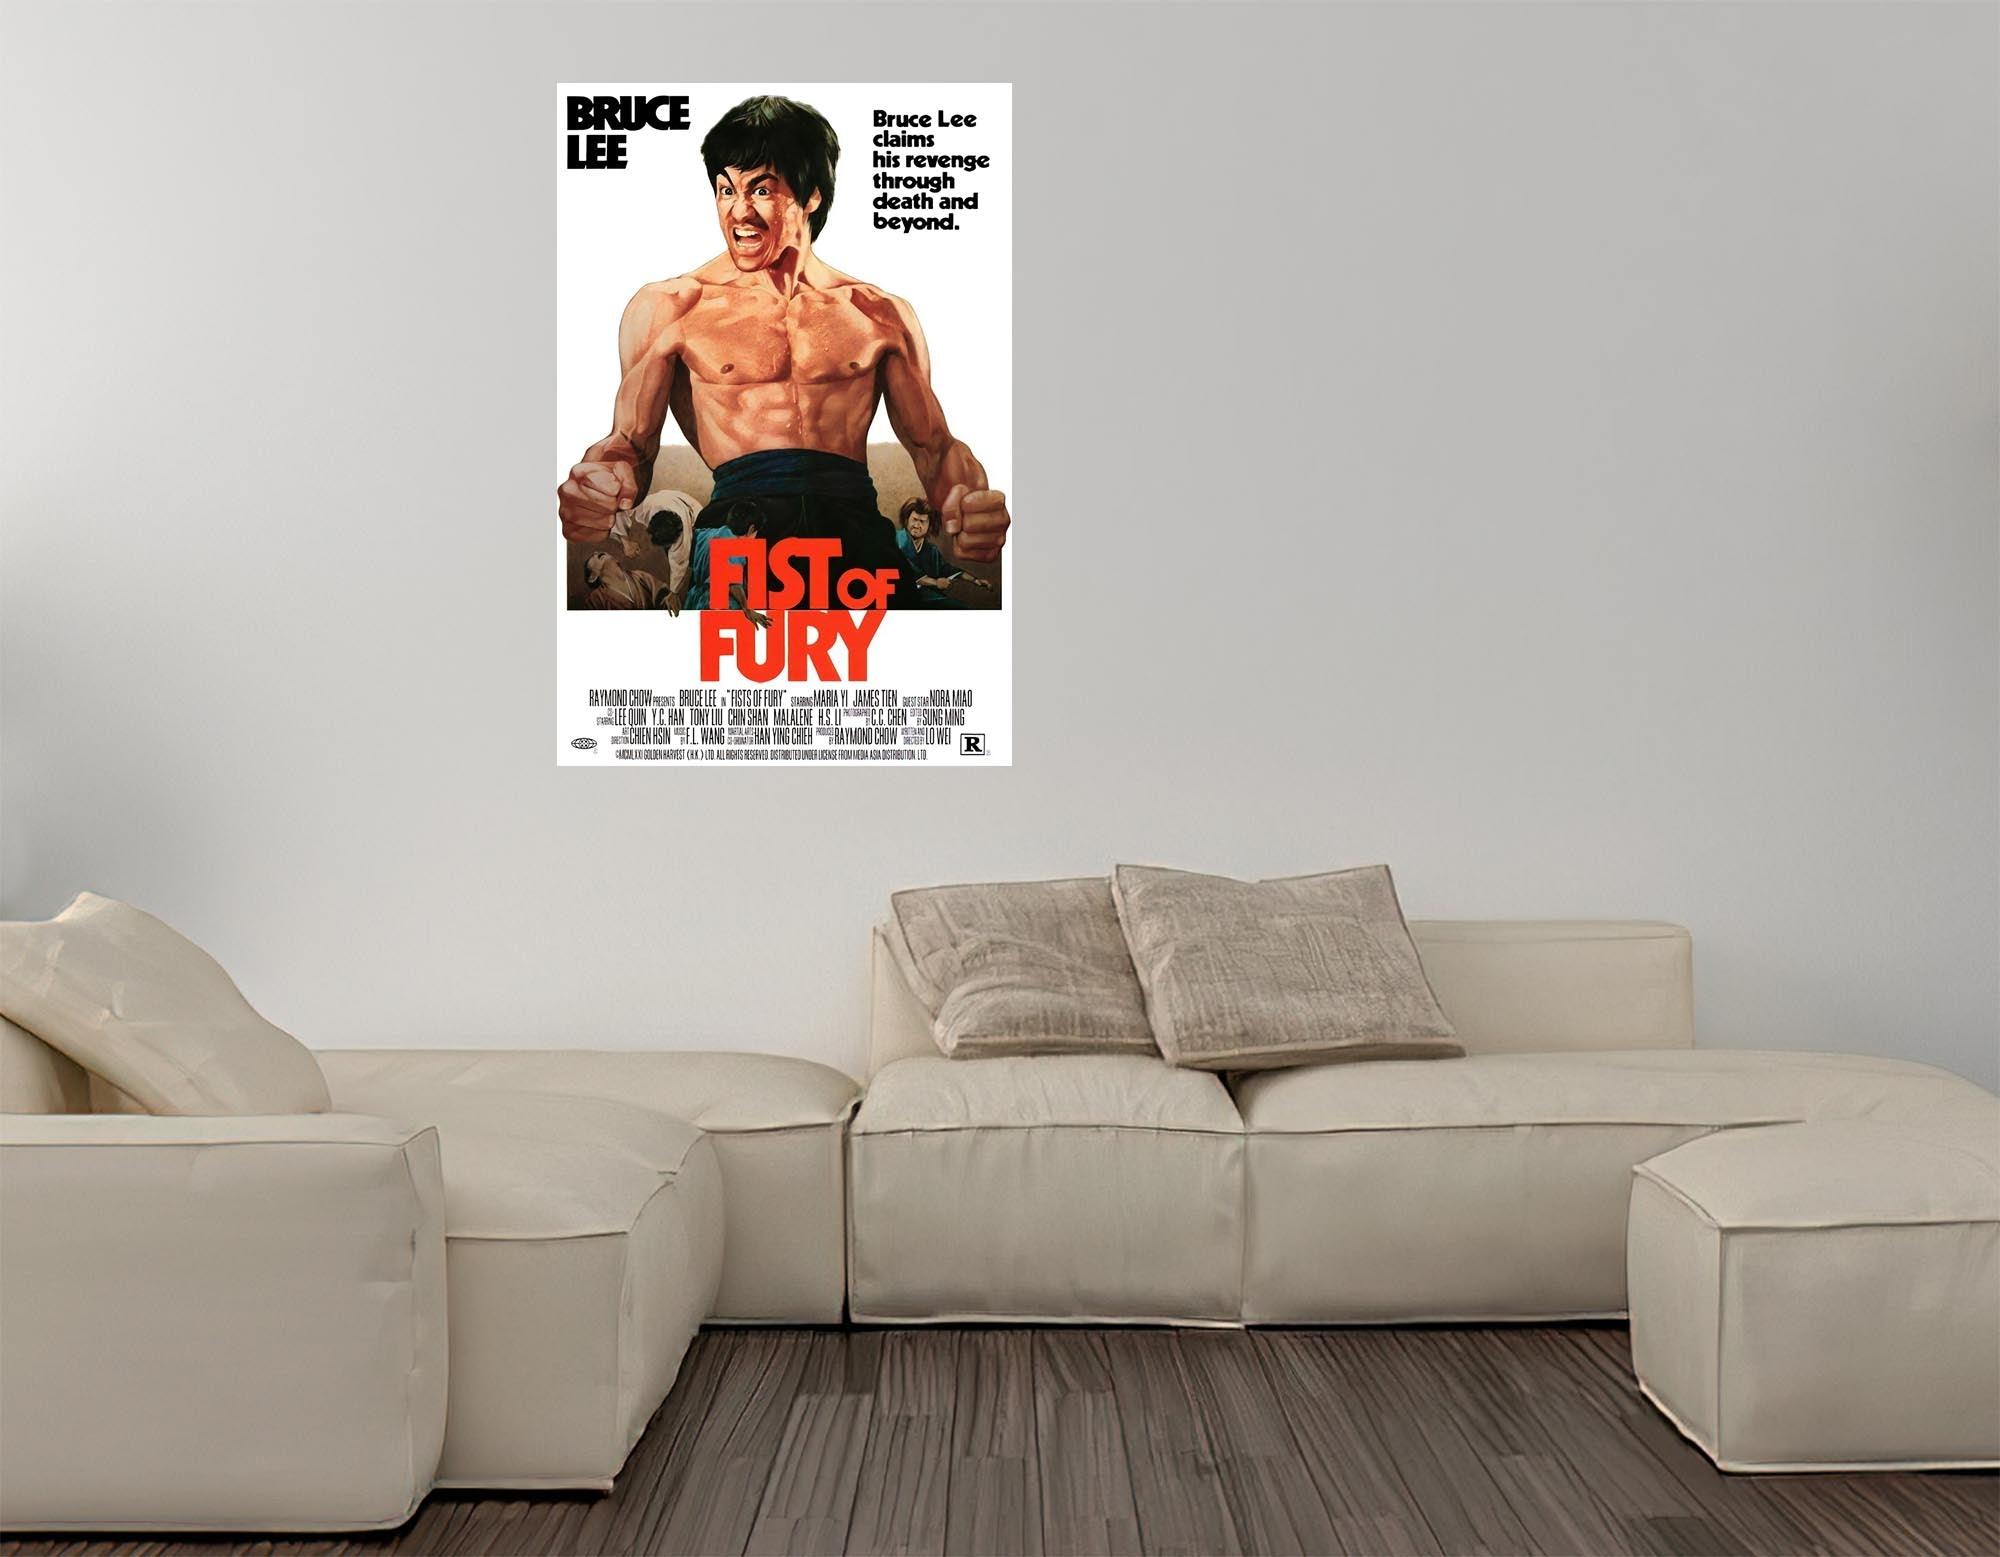 CoolWalls.ca Posters, Prints, & Visual Artwork Bruce Lee Firsts of Fury Movie Poster Vintage Artwork: Peel_n_Stick onto the wall, wallpaper like fabric